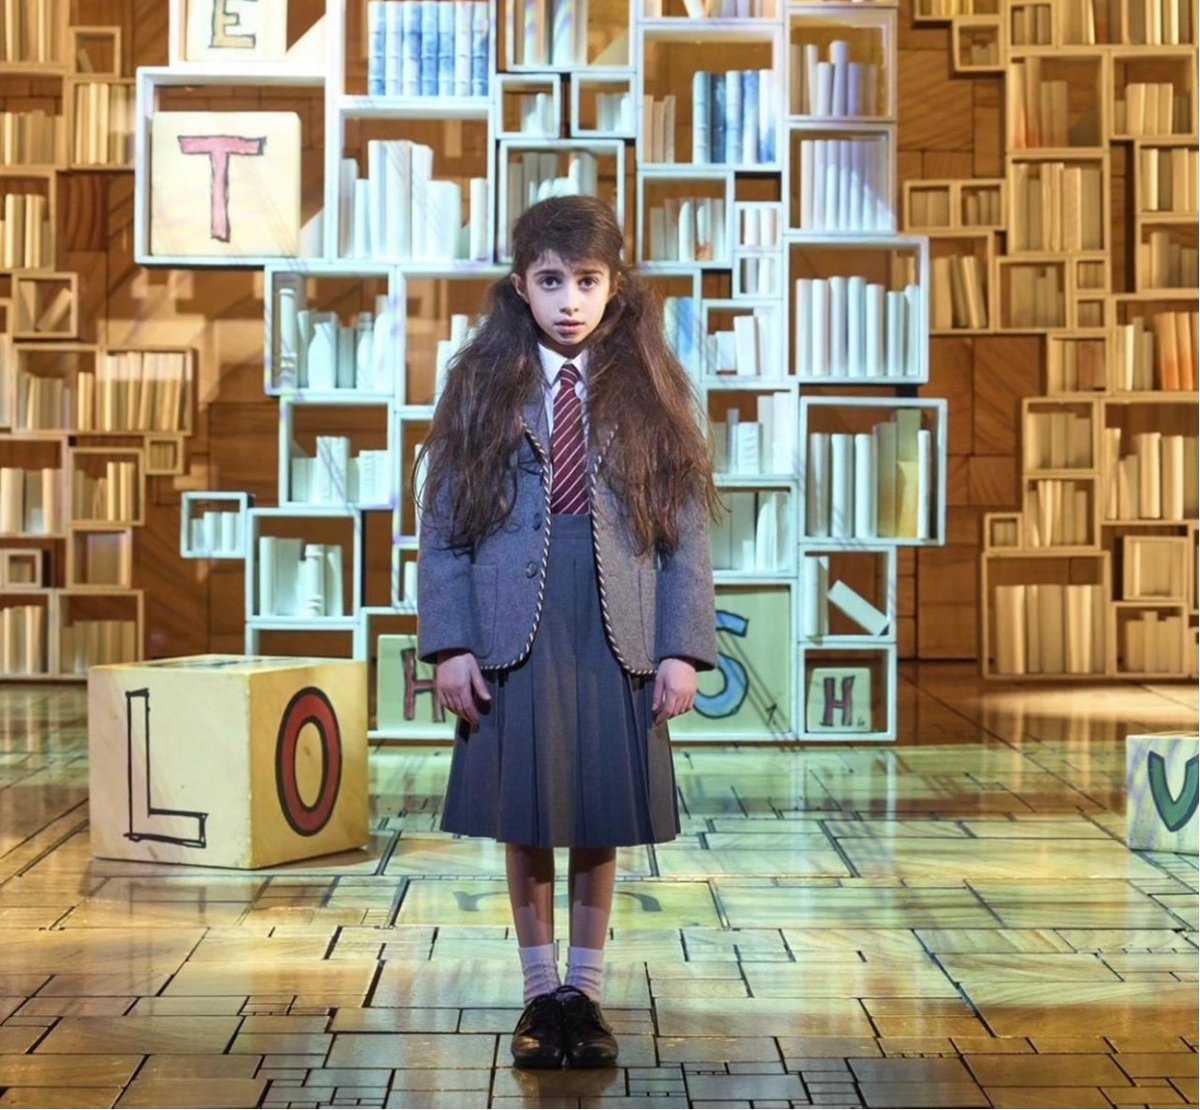 This weekend, Sophia in Year 5 took her final bow after a truly phenomenal one-year run playing the title role in #MatildaTheMusical in the West End. #aspiration #commitment #openingdoors